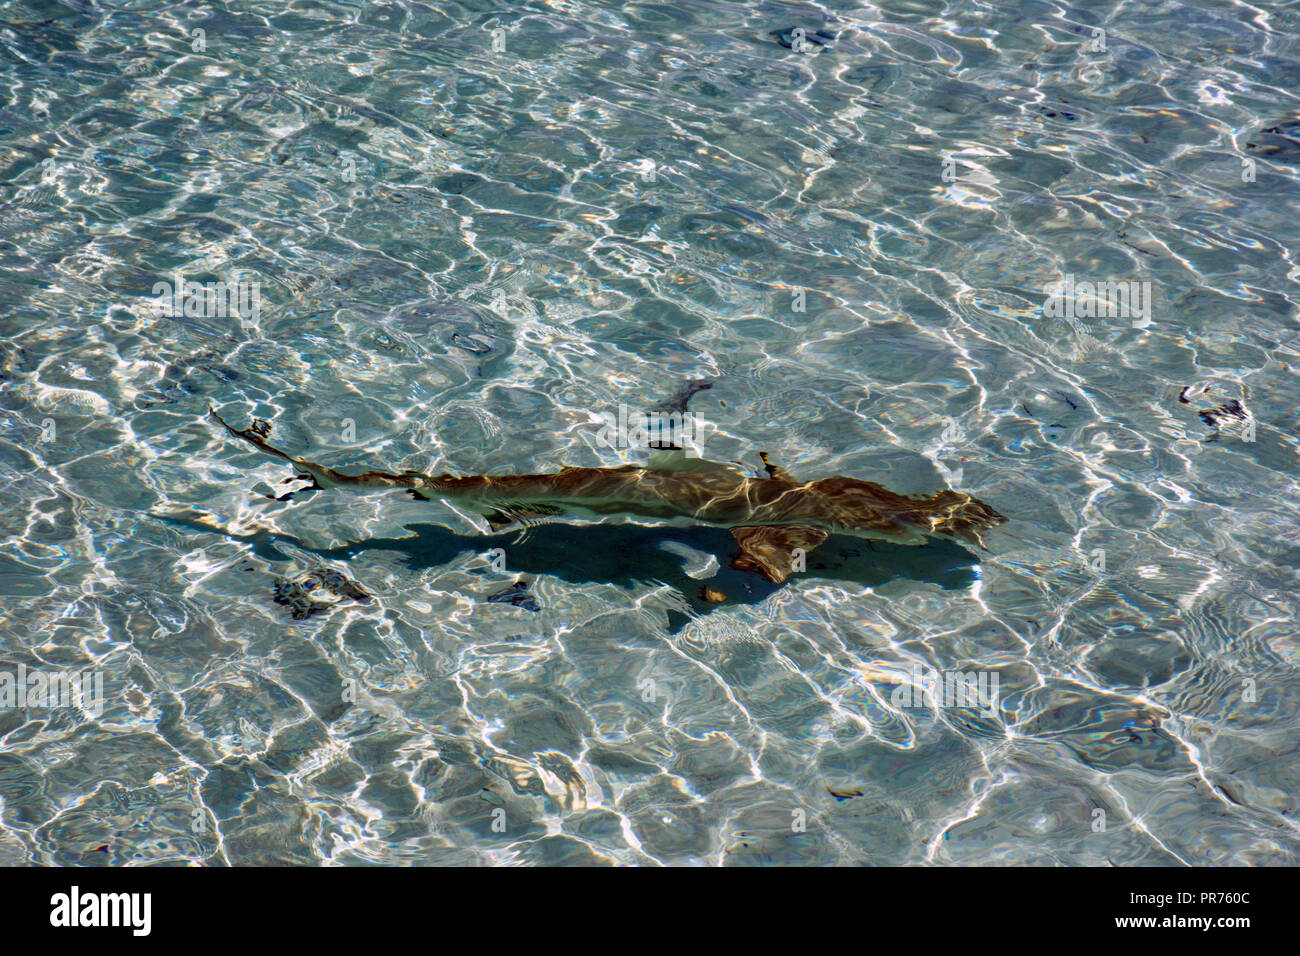 Blacktip reef shark, Carcharhinus melanopterus, swims in a shallow beach, Ant Atoll, Pohnpei, Federated States of Micronesia Stock Photo